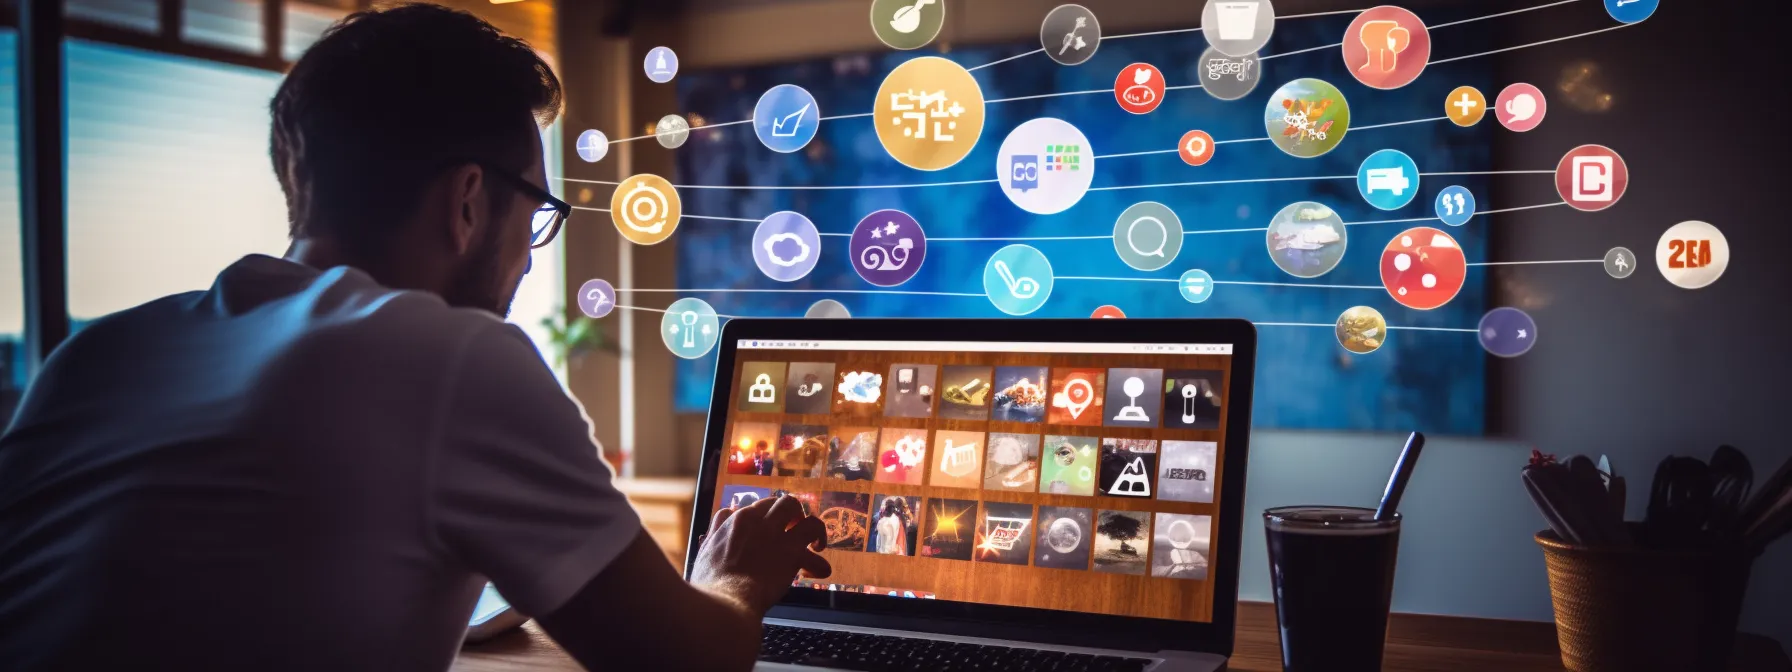 a person strategically planning social media content and seo tactics on a computer screen while surrounded by various social media icons.